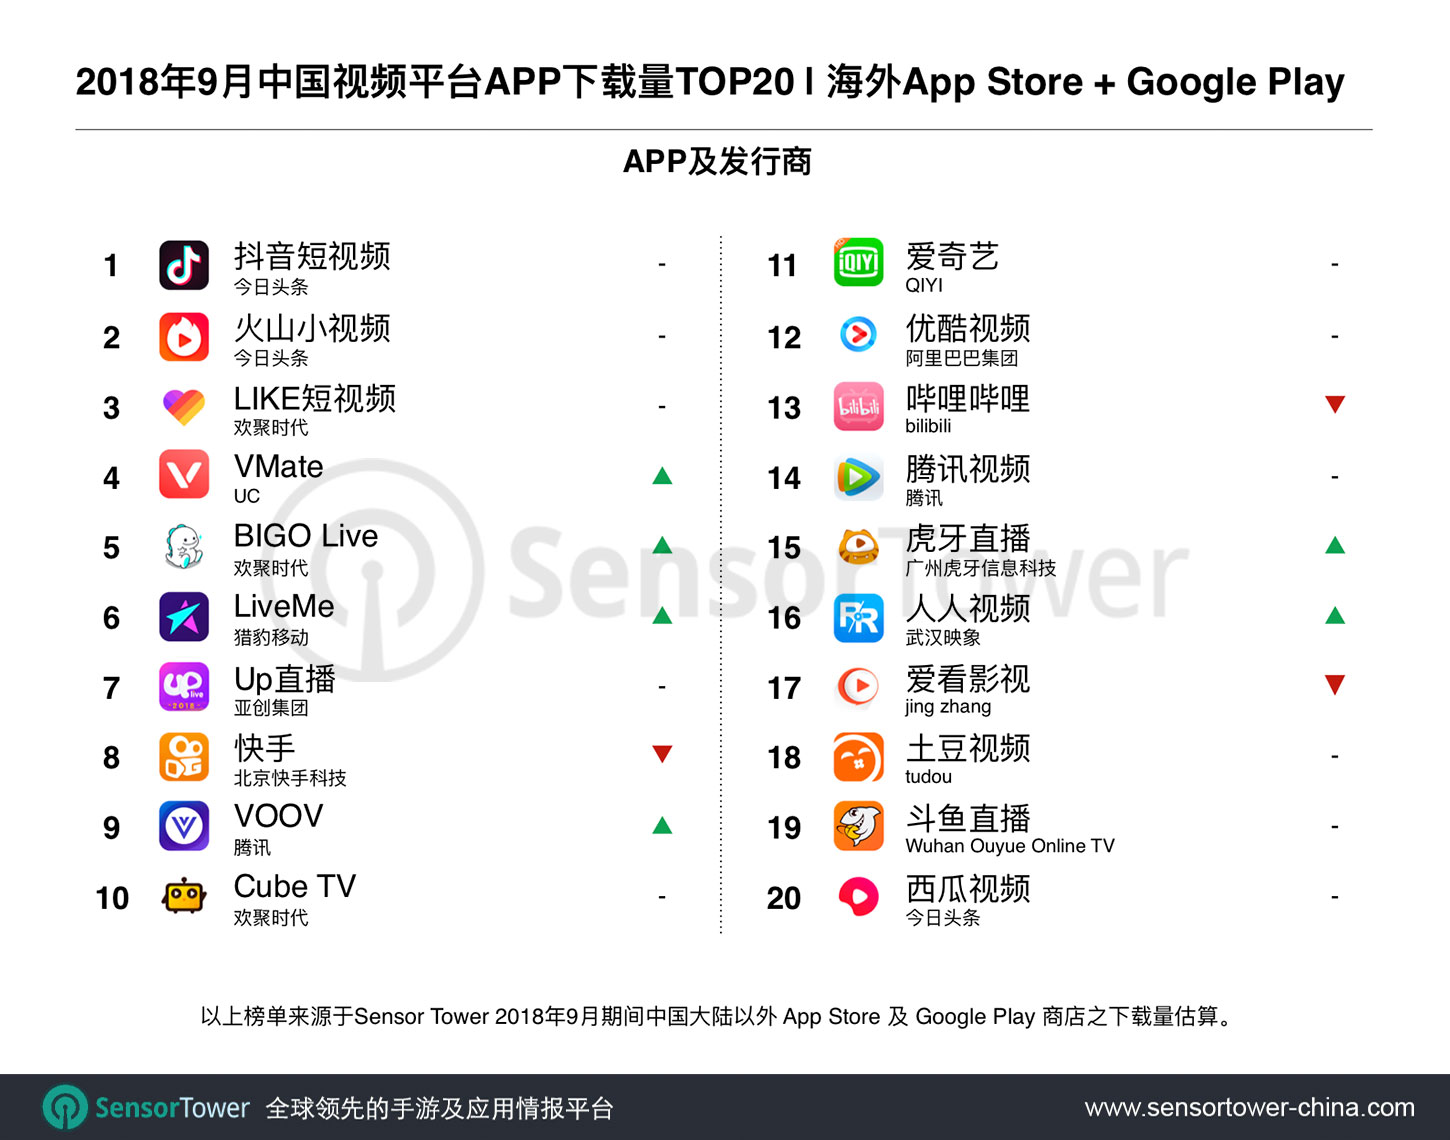 September 2018 Top 30 Grossing Chinese-Made Video Apps by Downloads Outside China